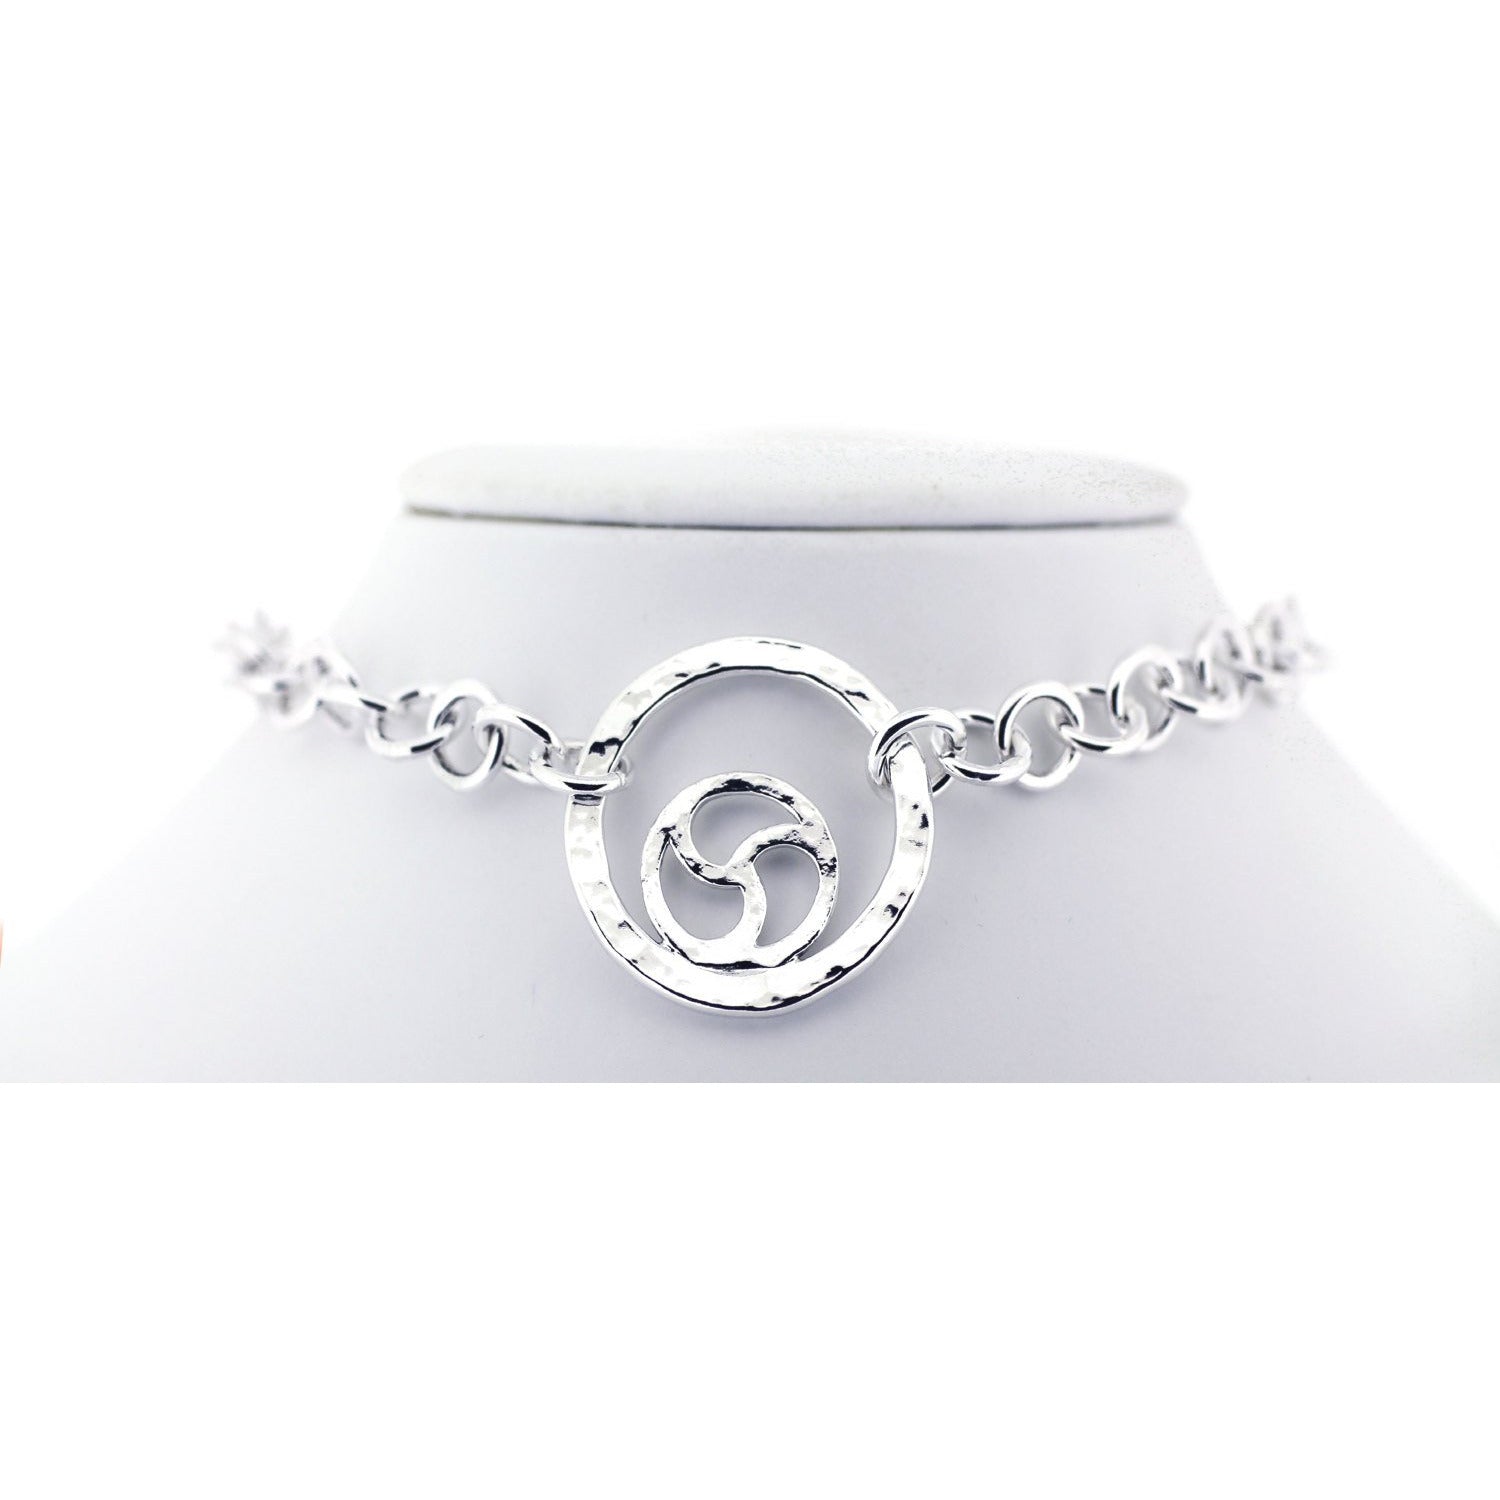 Handmade Sterling Silver Day Collar with Hammered O Ring and Triskele Design - Elegant and Discreet for Any Occasion